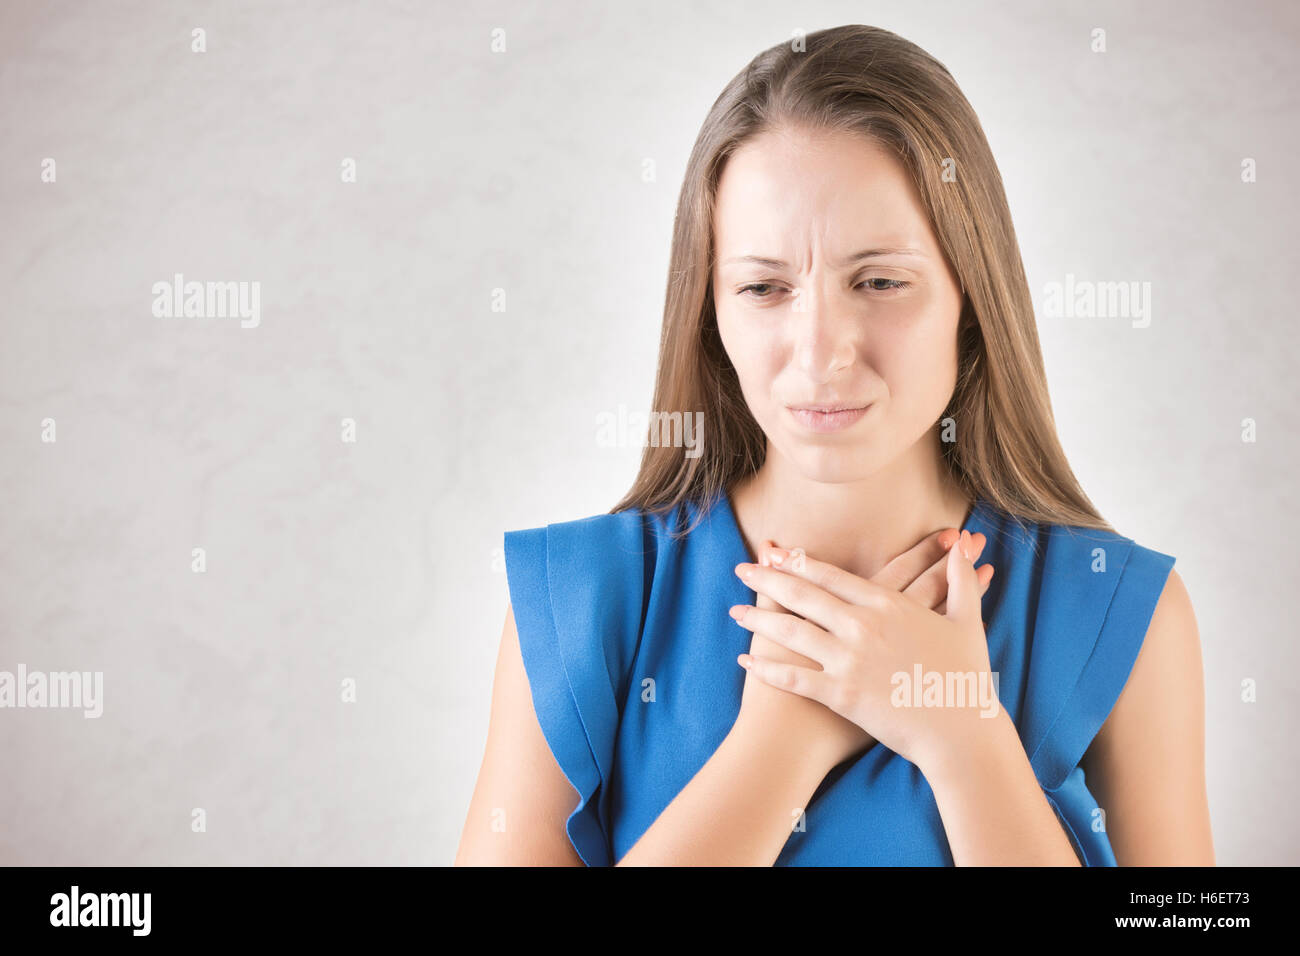 Woman with a sore throat holding her neck, isolated in grey Stock Photo